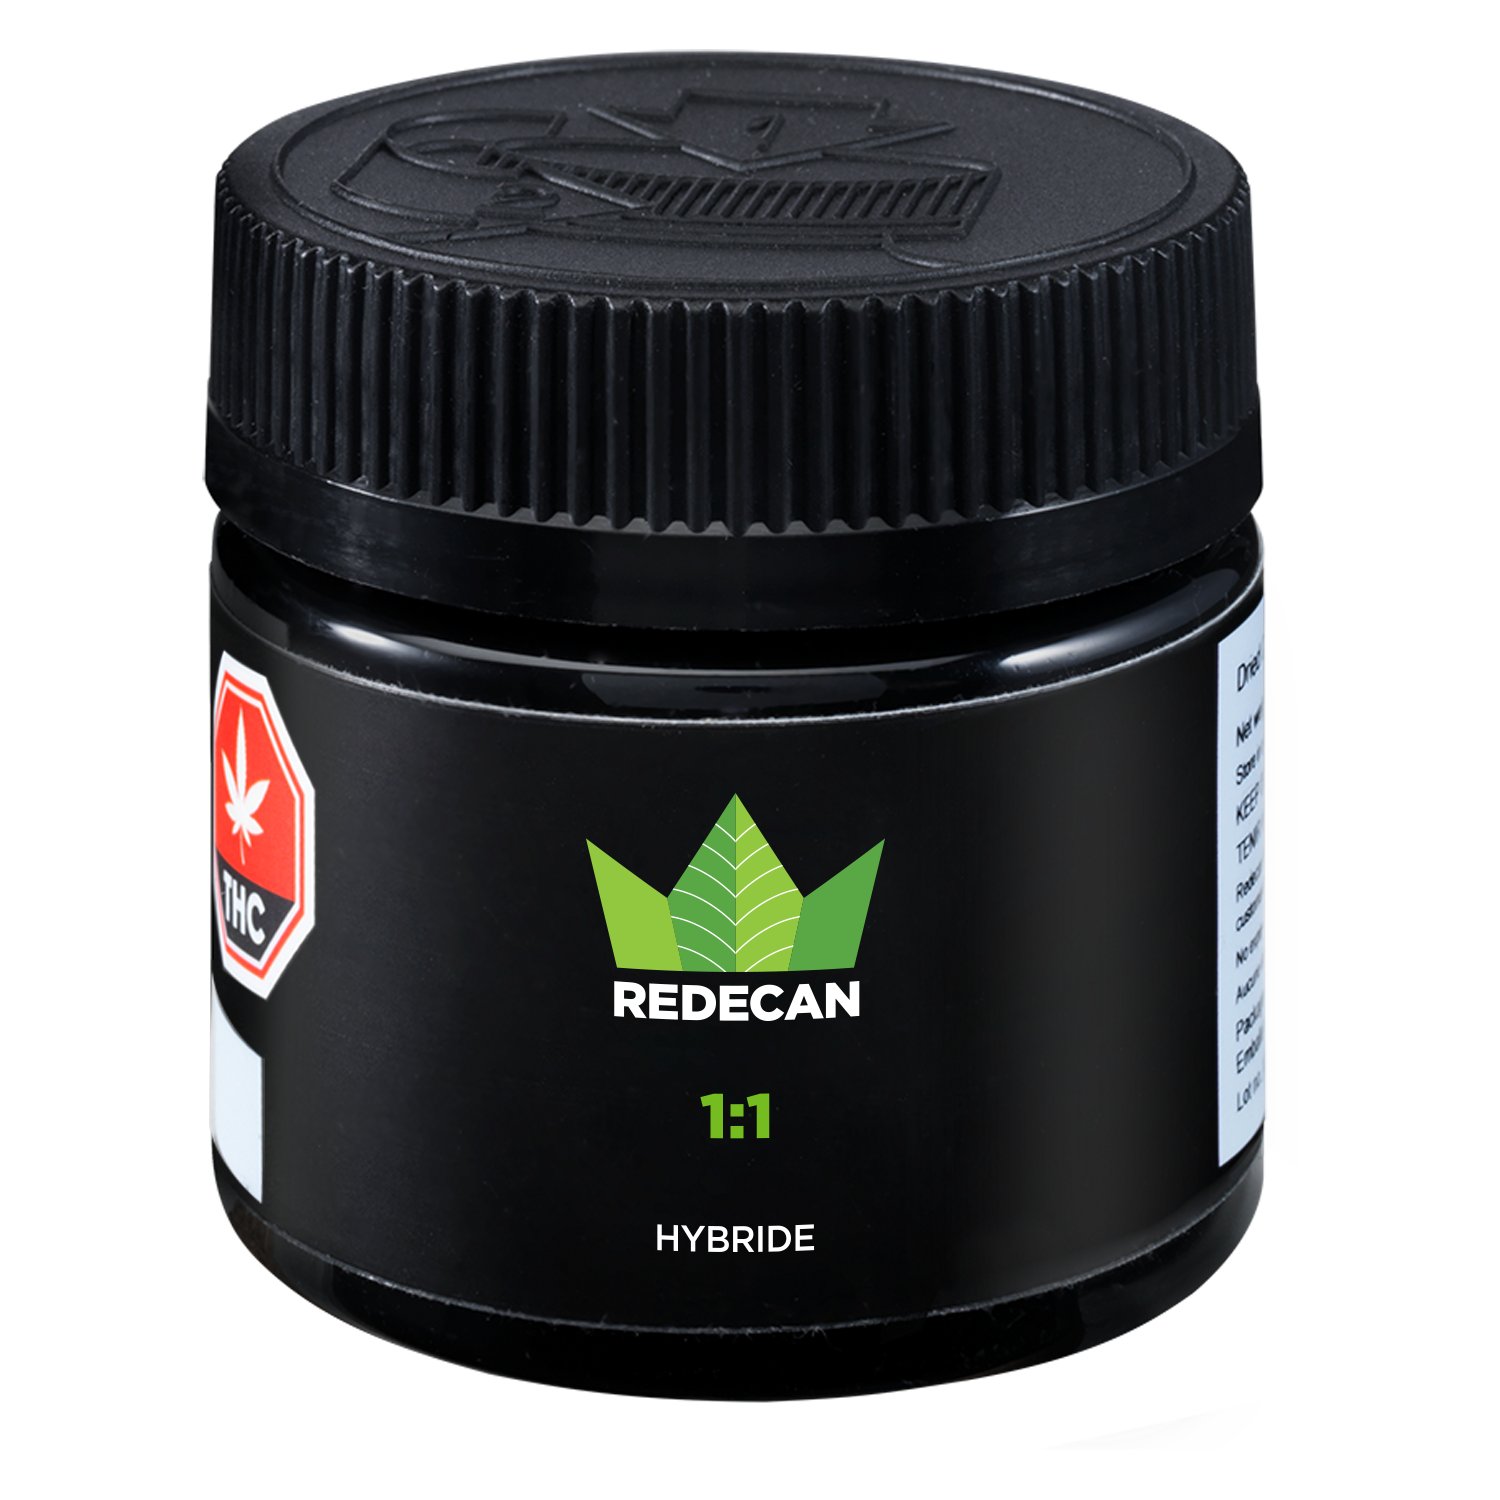 Redecan 1:1